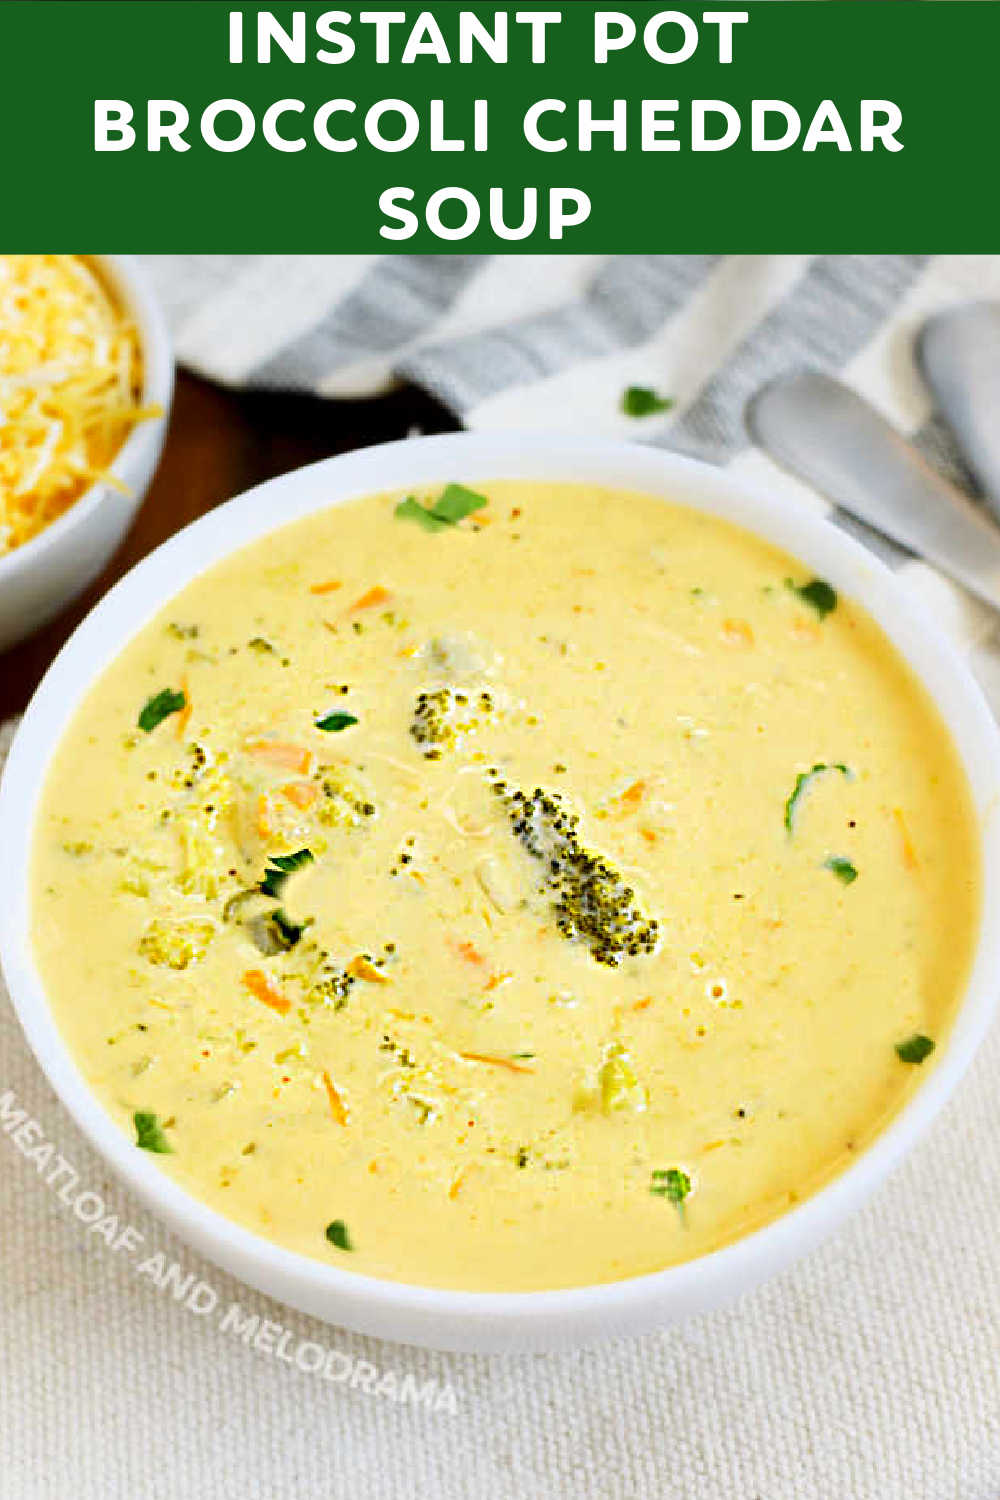 Instant Pot Broccoli Cheddar Cheese Soup is creamy, rich, thick and delicious. This pressure cooker soup recipe is better than Panera Bread. It's homemade and ready about 30 minutes! via @meamel